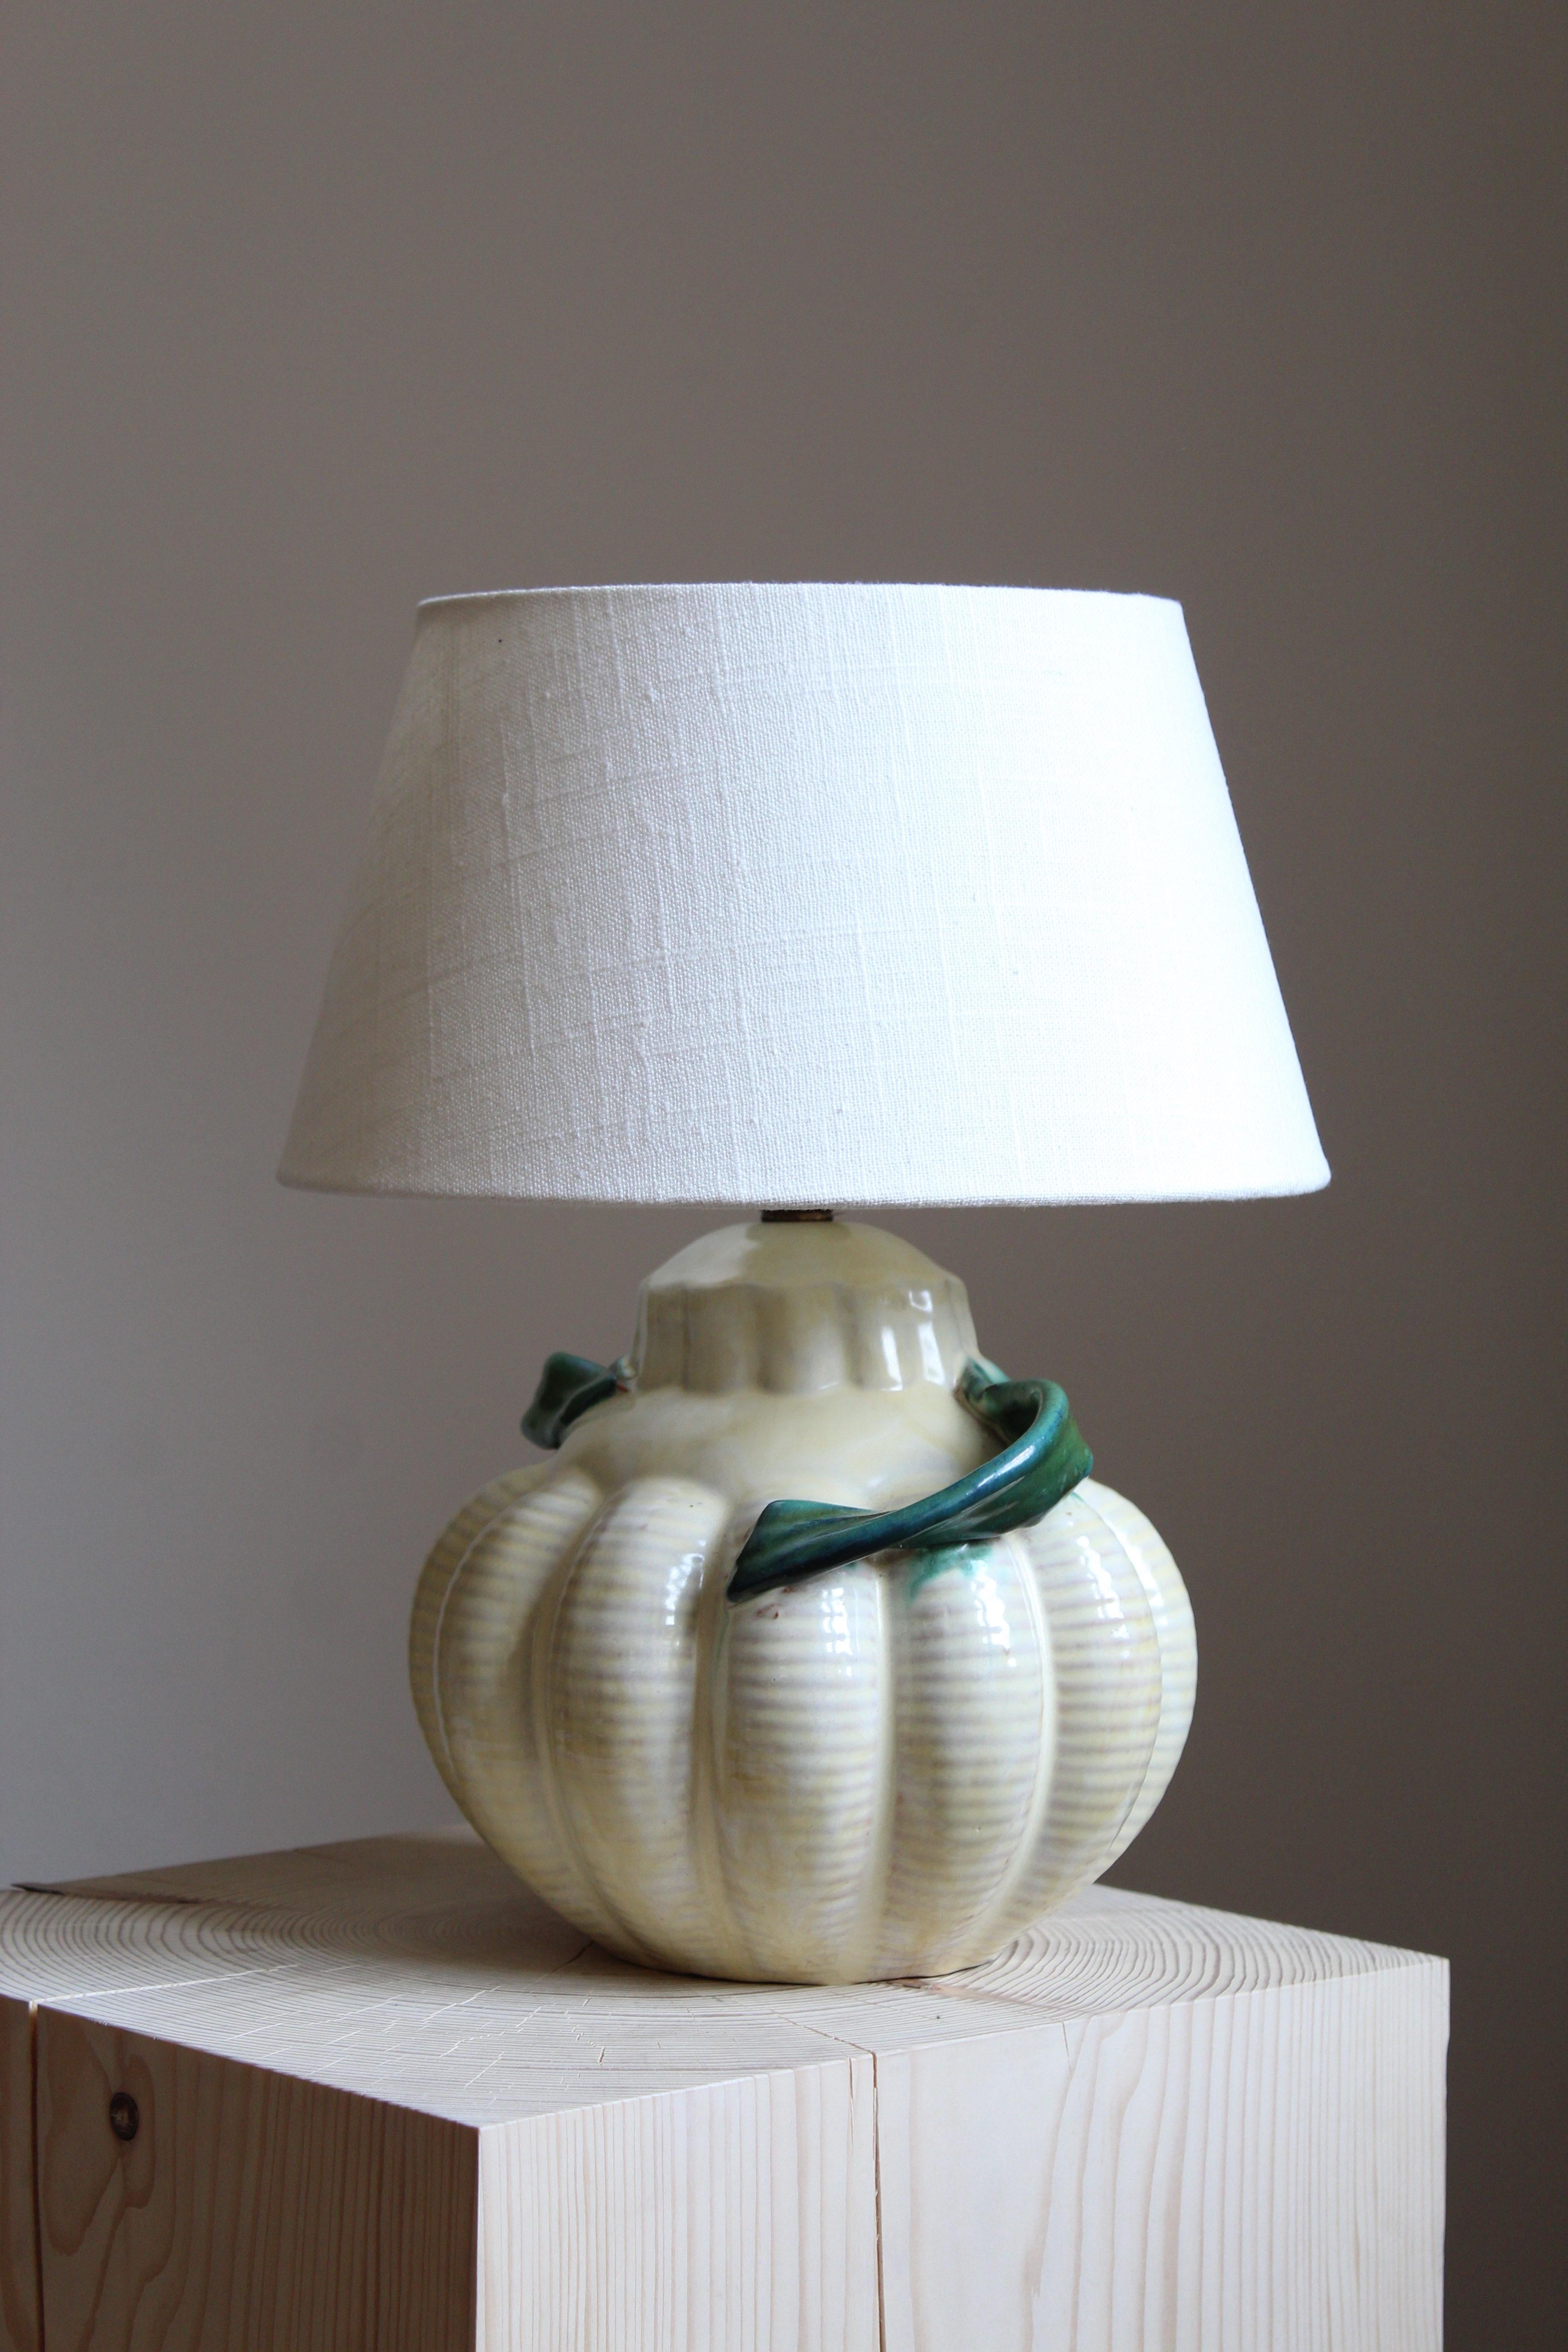 A table lamp by iconic Swedish ceramic firm Ekeby. In glazed and hand-painted ceramic. Marked.

Sold without lampshade. Stated dimensions exclude lampshade.

Glaze features white-green colors.

Other designers of the period include Axel Salto, Carl